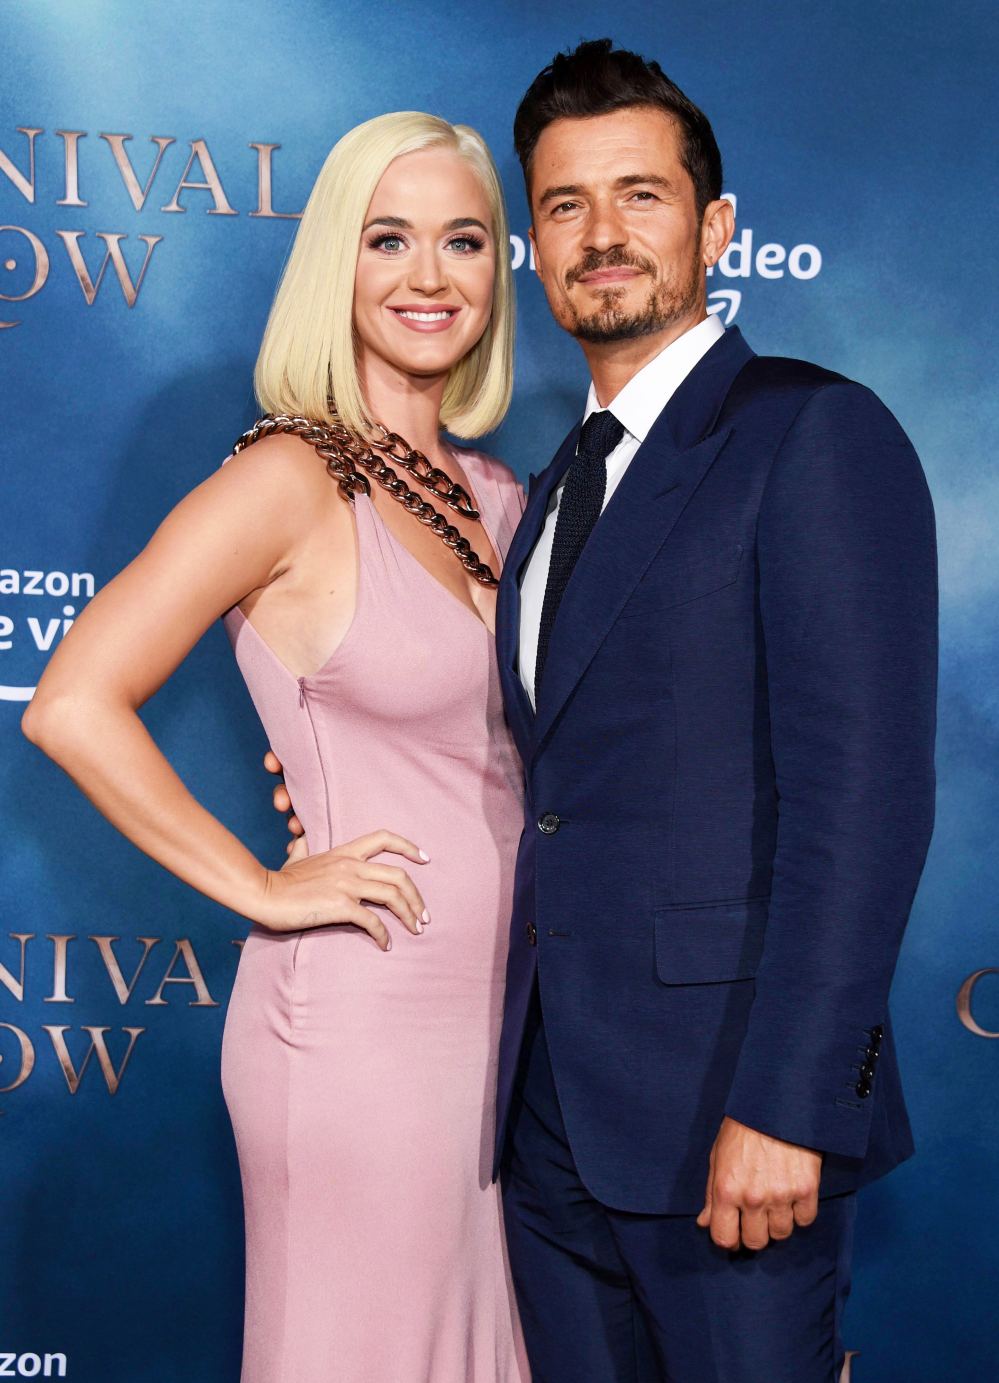 Pregnant Katy Perry Makes Orlando Bloom Laugh as She Shows Off Dance Moves